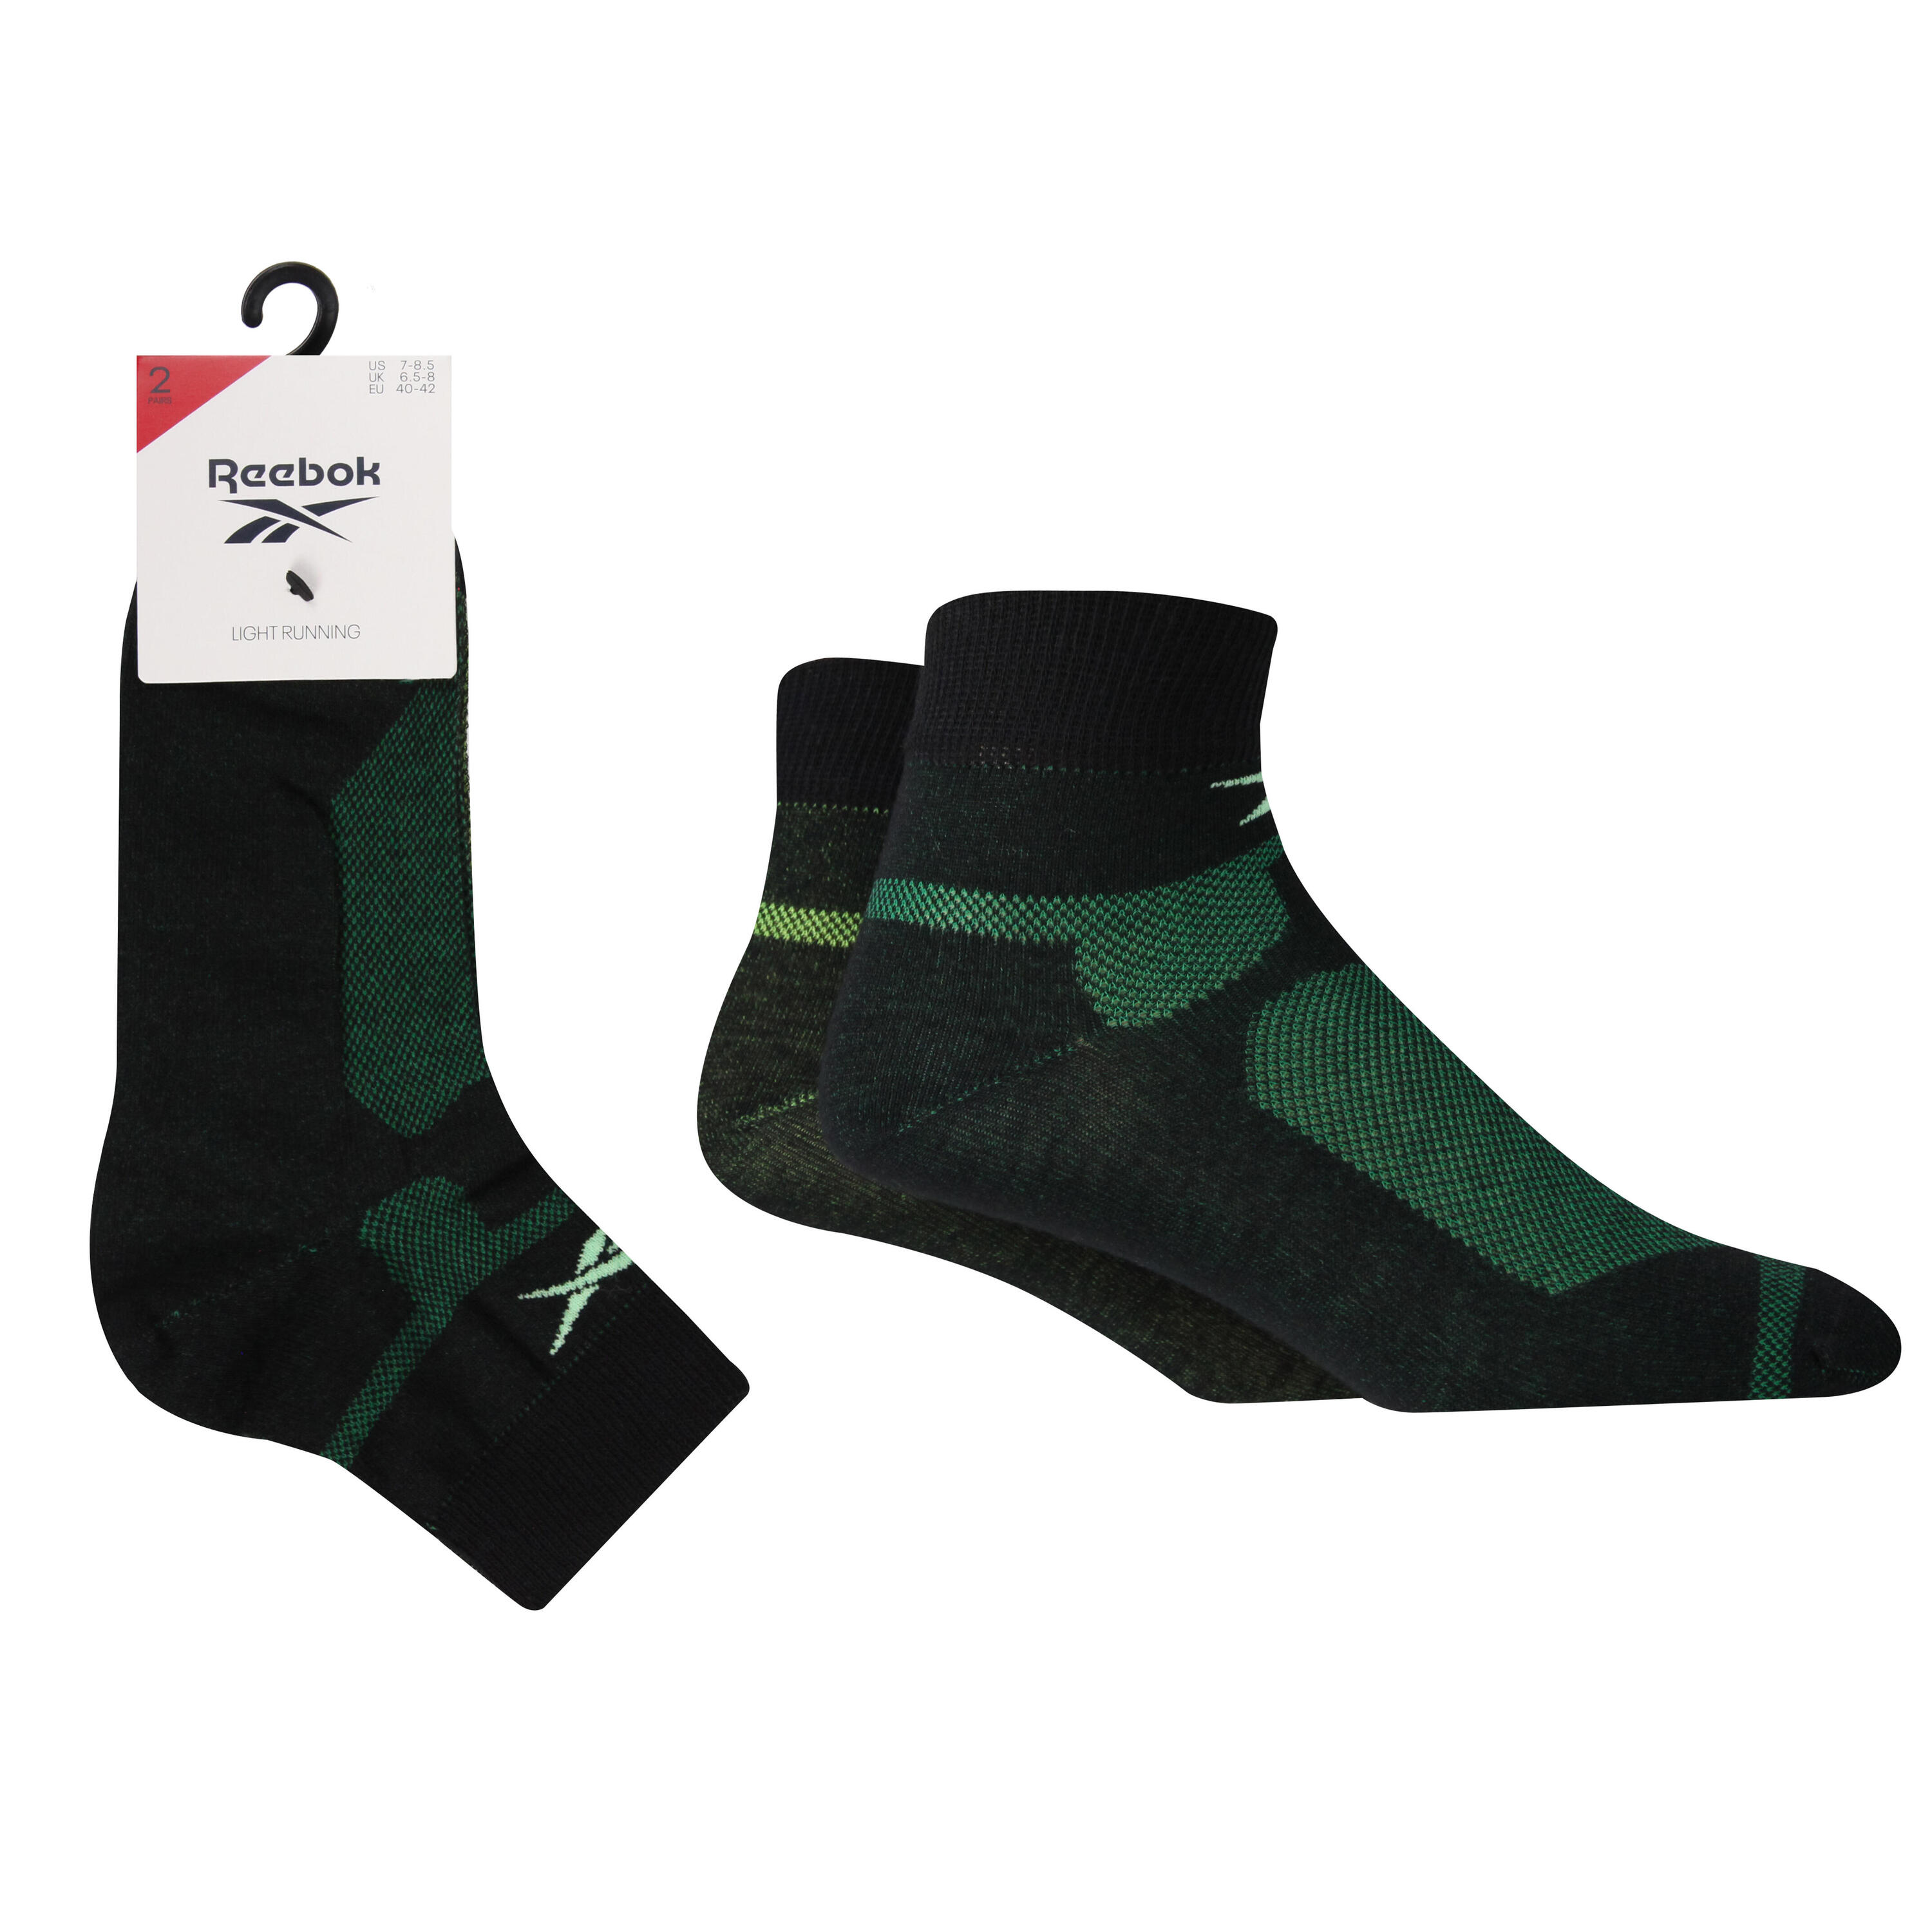 REEBOK 2 Pair Pack Light Running Sports Socks With Mesh Top For Ventilation